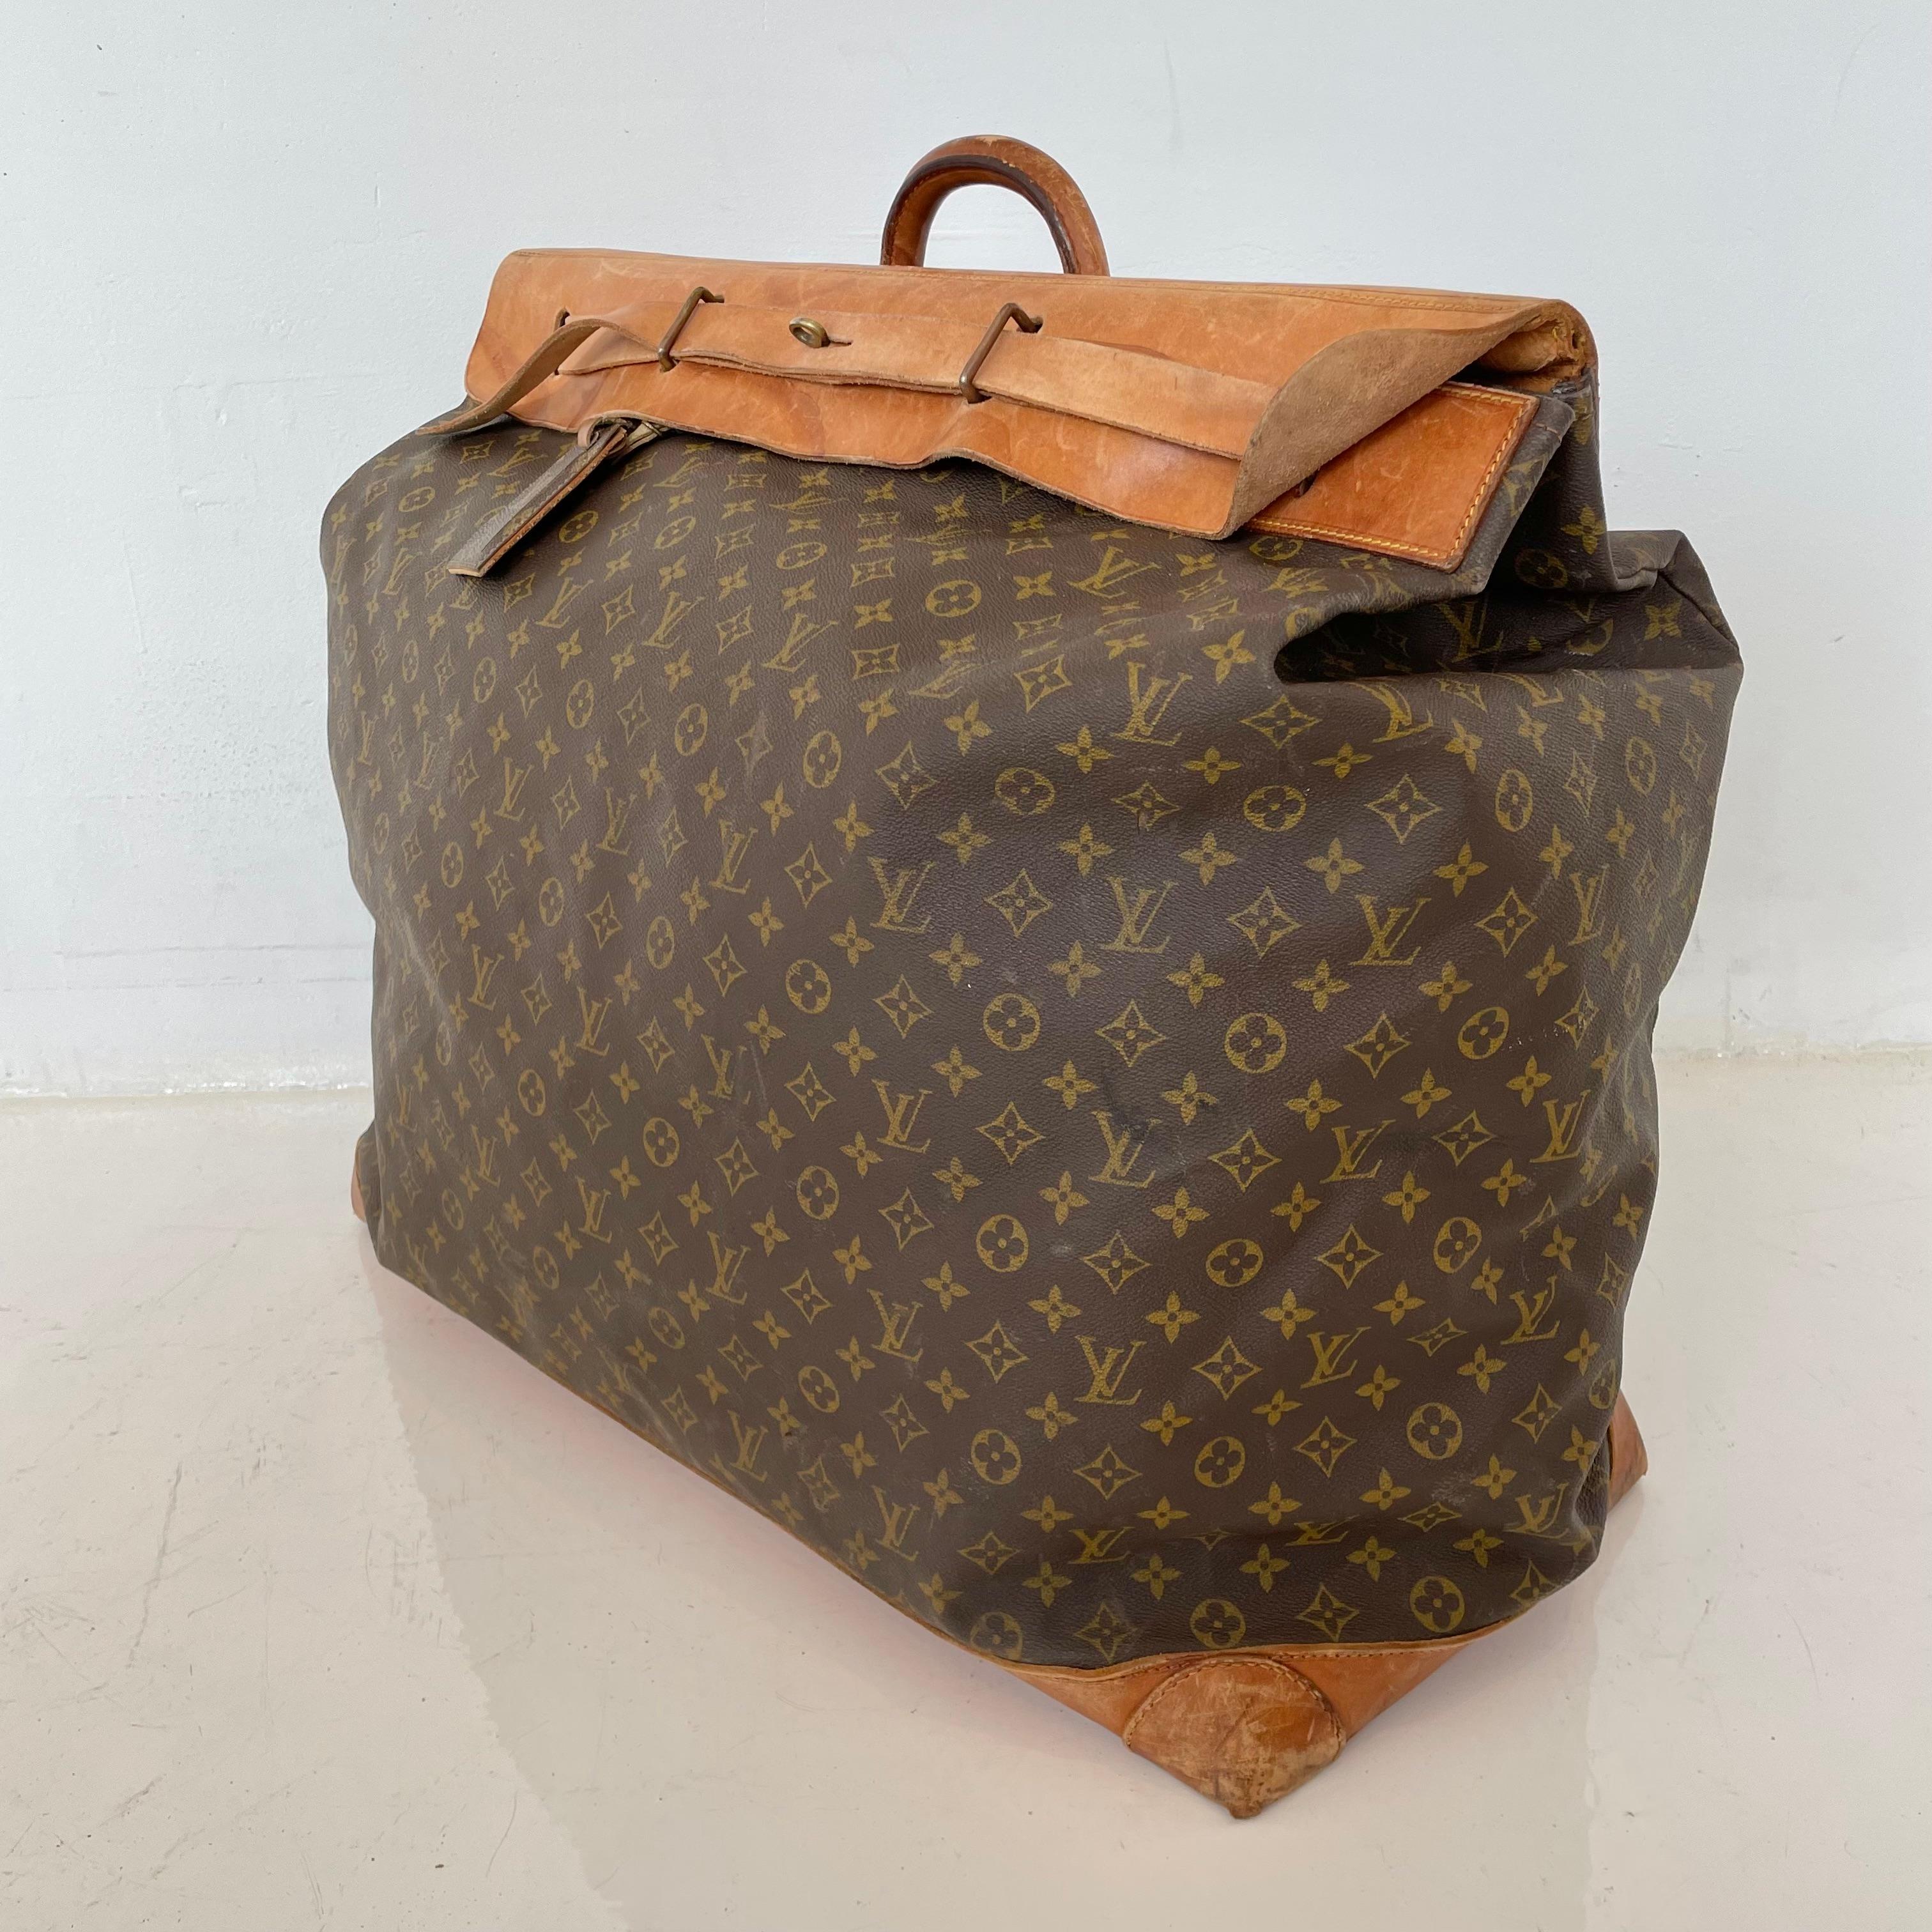 Vintage Louis Vuitton Steamer Bag In Good Condition For Sale In Los Angeles, CA